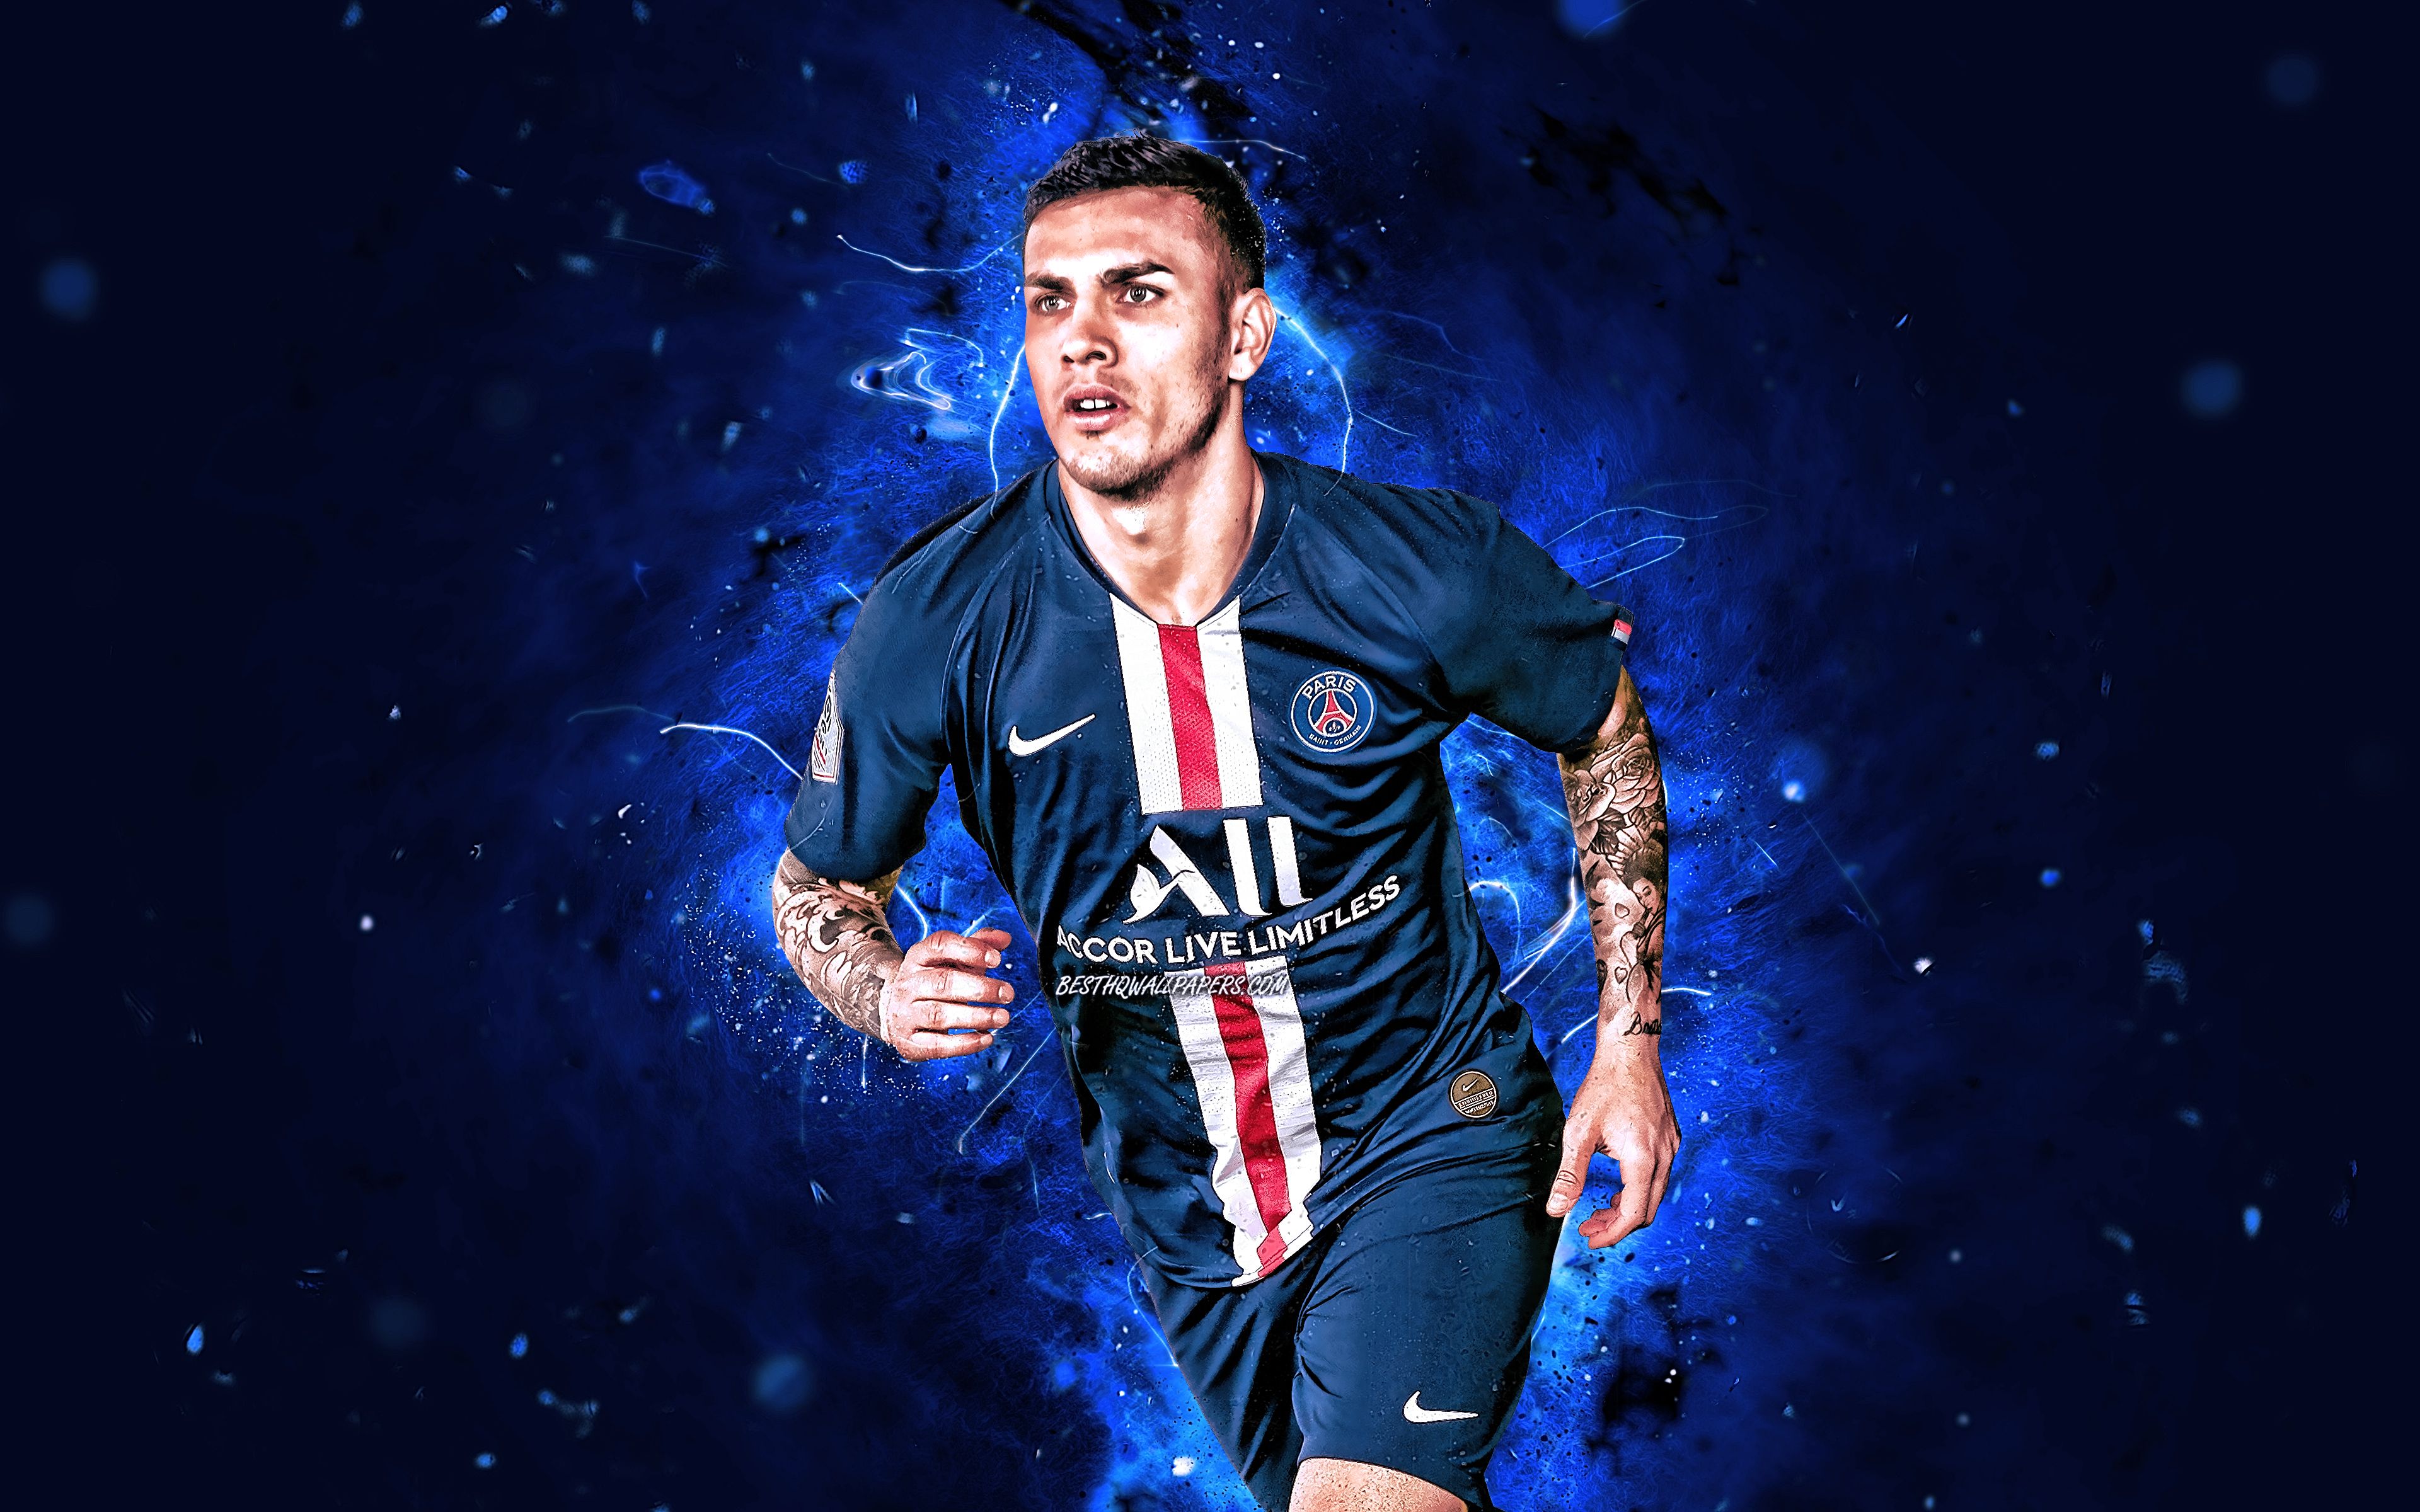 Download Wallpaper Leandro Paredes, 4k, Season 2019 Argentine Footballers, Midfielder, PSG, Neon Lights, Leandro Daniel Paredes, Soccer, Ligue Football, Paris Saint Germain For Desktop With Resolution 3840x2400. High Quality HD Picture